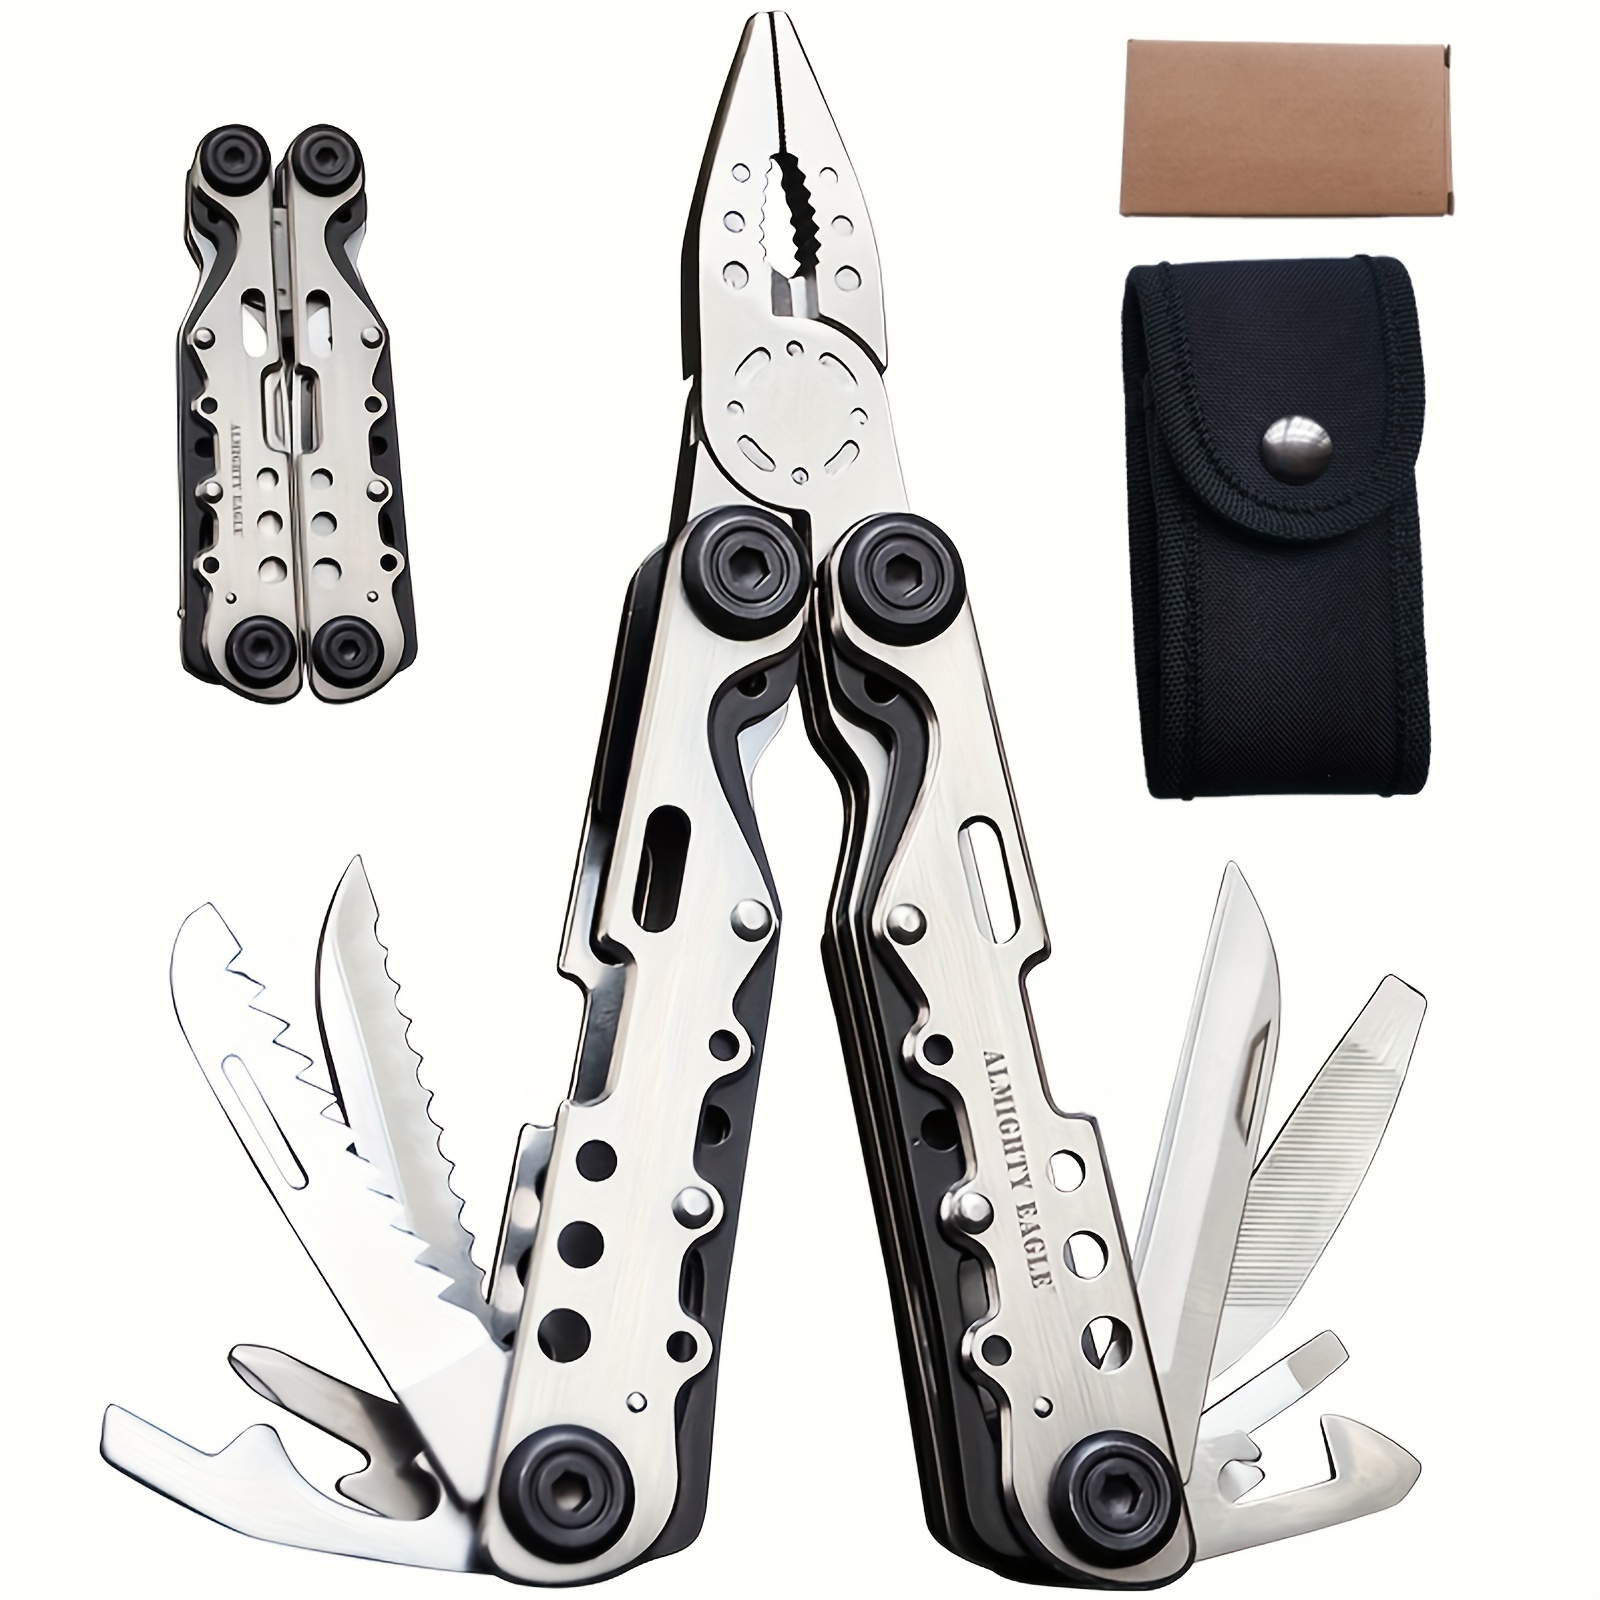 

Eagle Multifunctional Tool Pliers, Outdoor Combination Folding Pliers, Portable Edc Knife Pliers, Camping Emergency Pliers, Portable Multi-purpose Tool Pliers, Cycling Repair Screwdriver